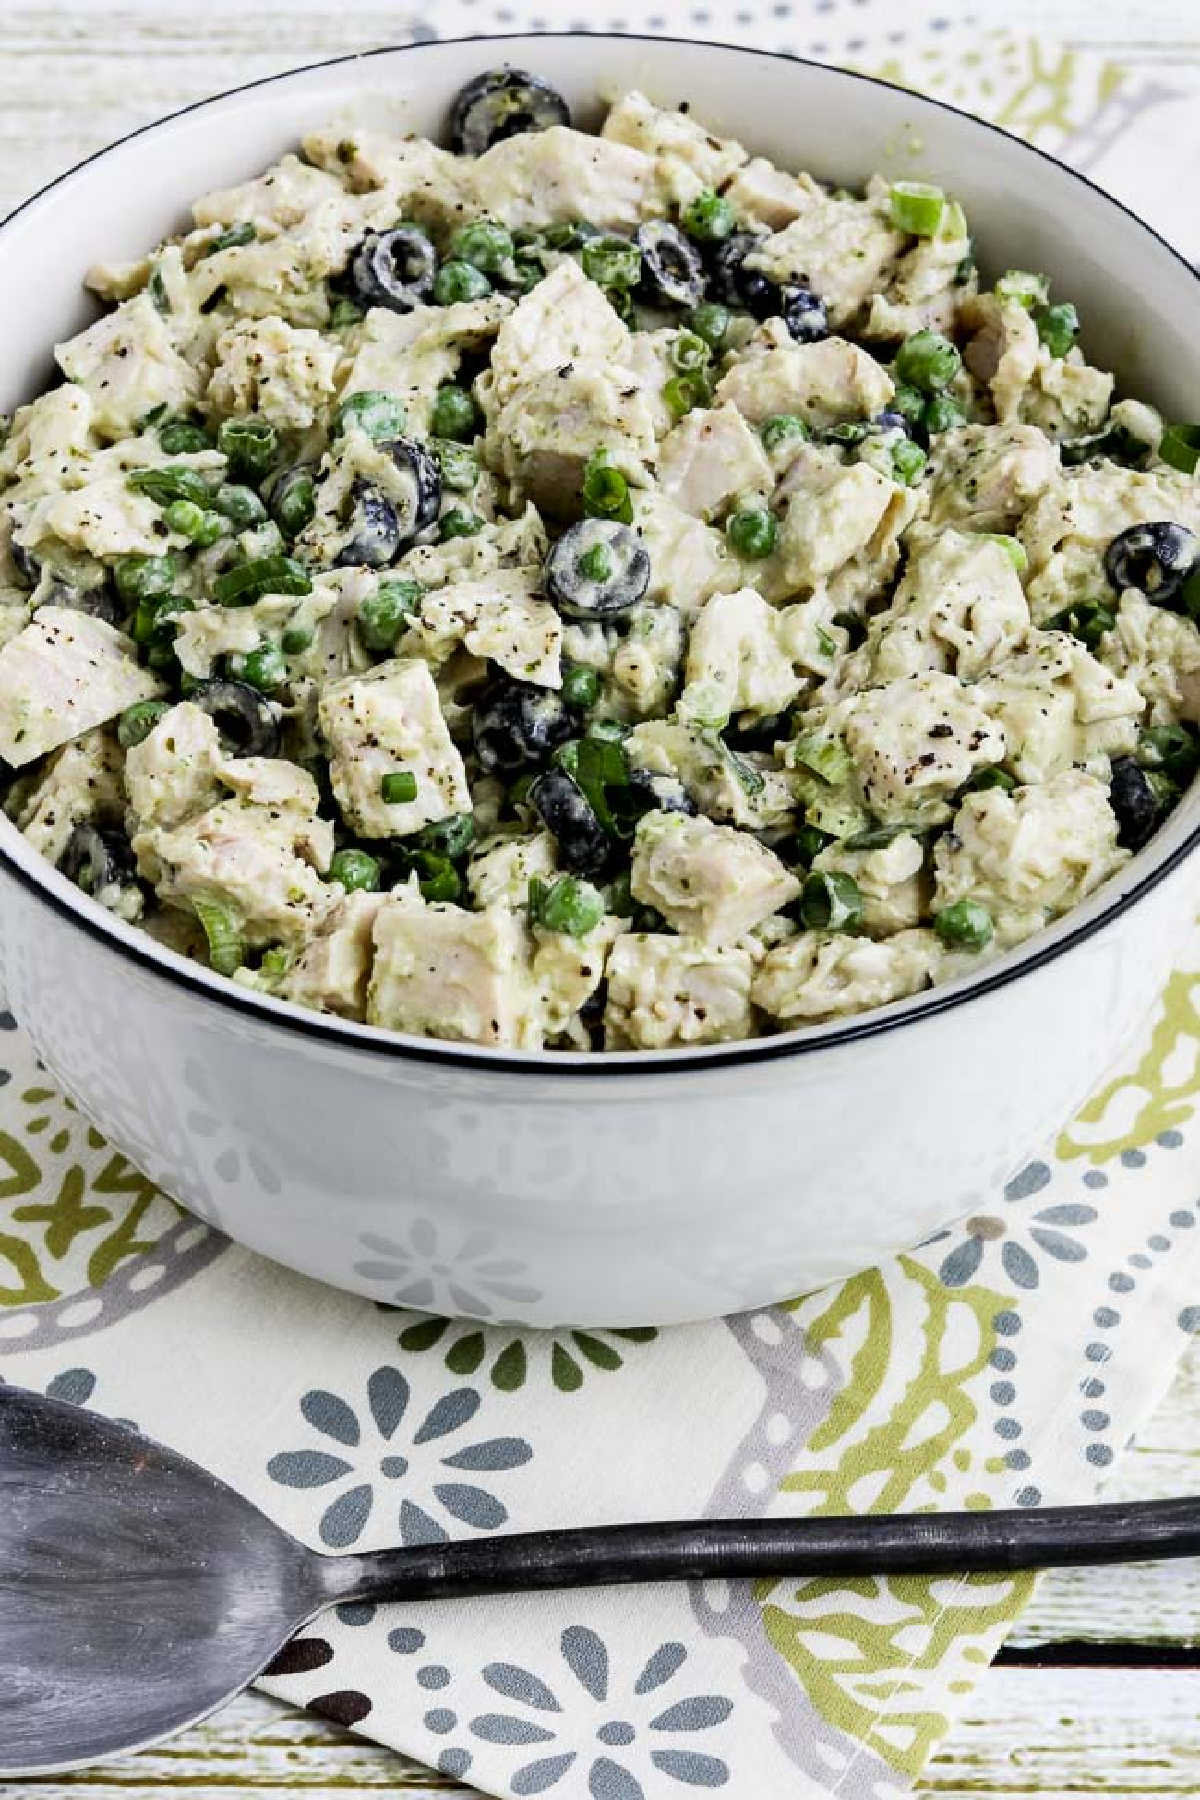 Chicken Pesto Salad in serving bowl with fork shown on patterned napkin